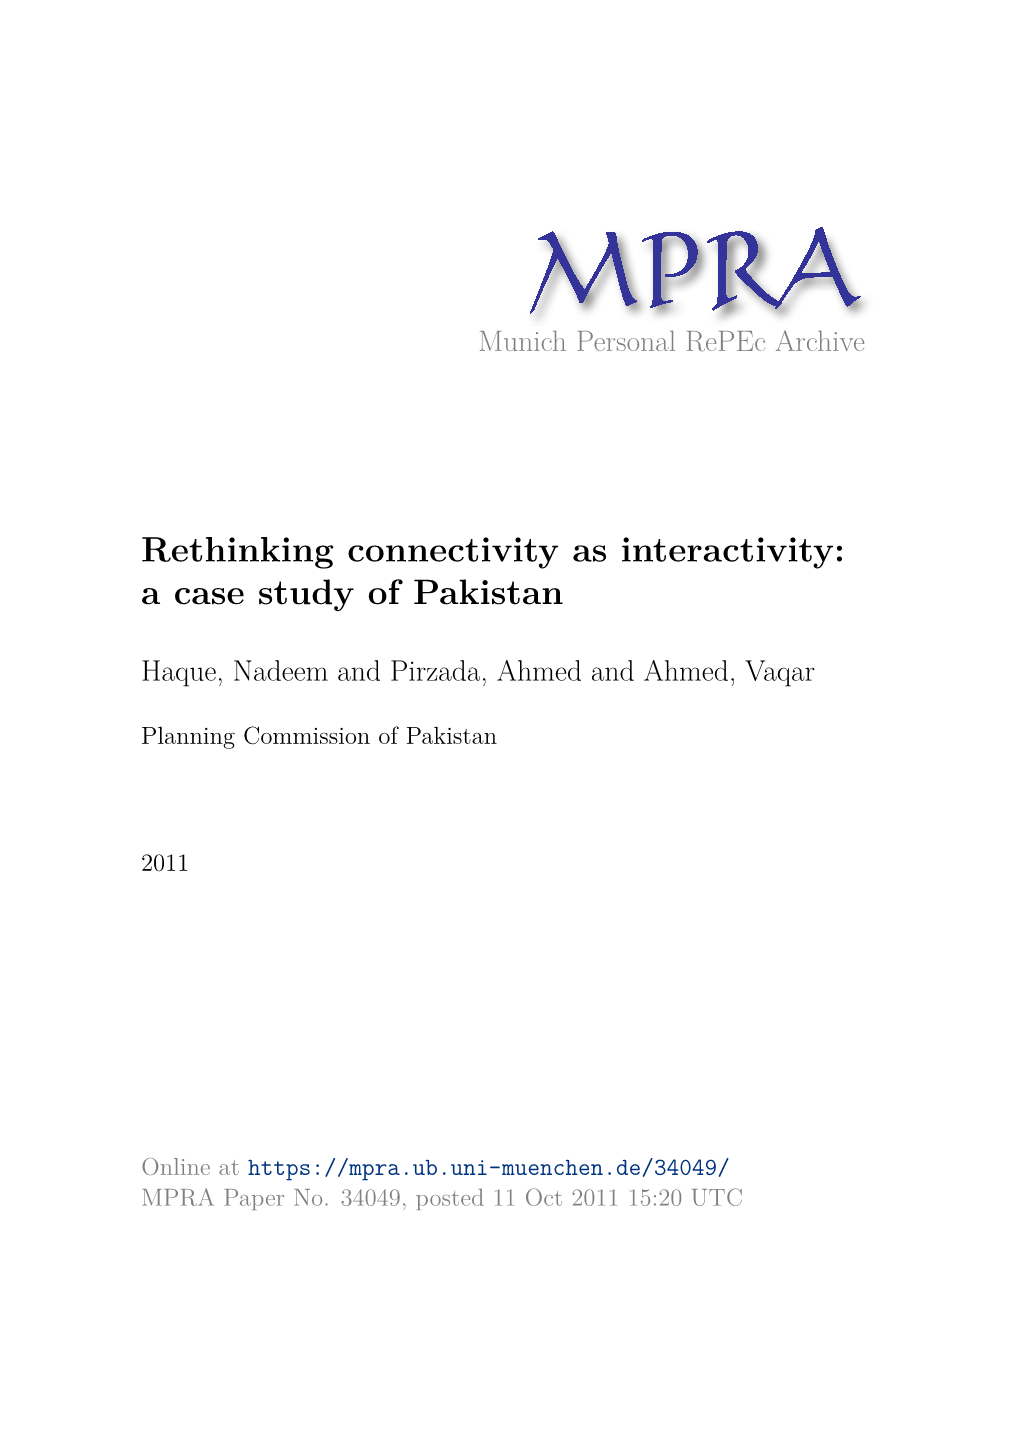 Rethinking Connectivity As Interactivity: a Case Study of Pakistan